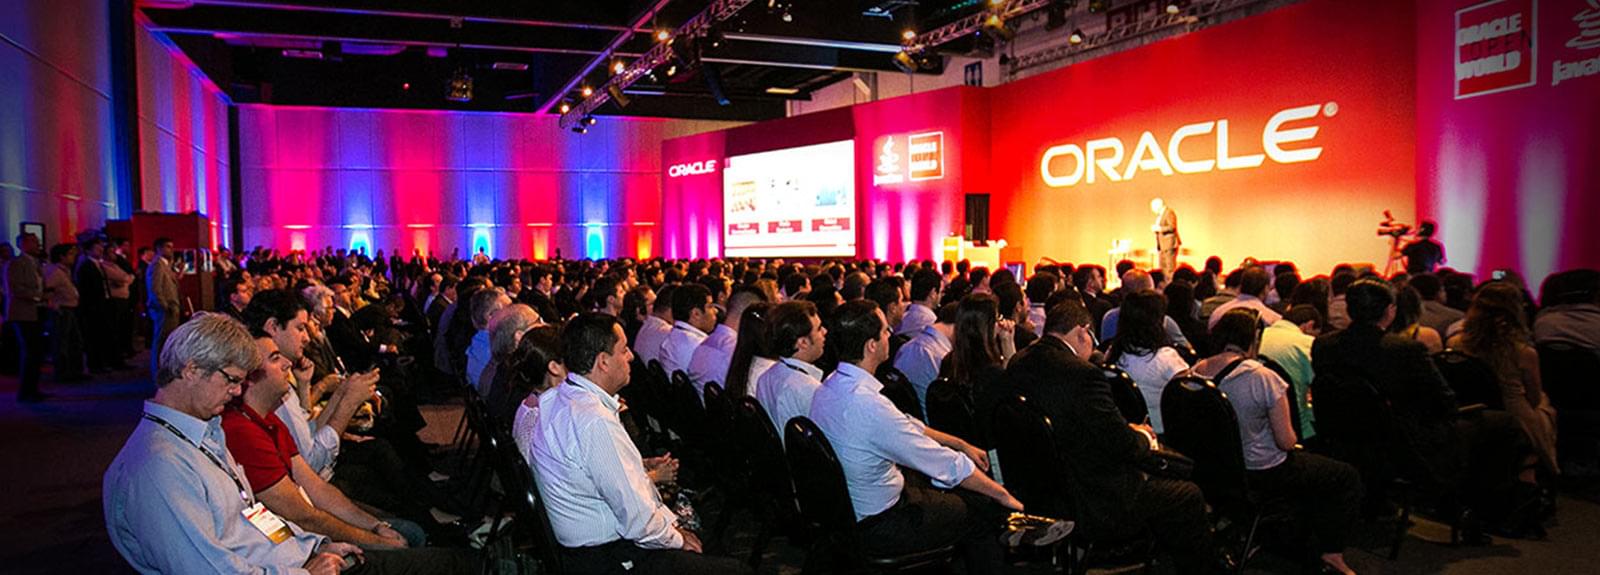 oracle openworld 2015 lecture